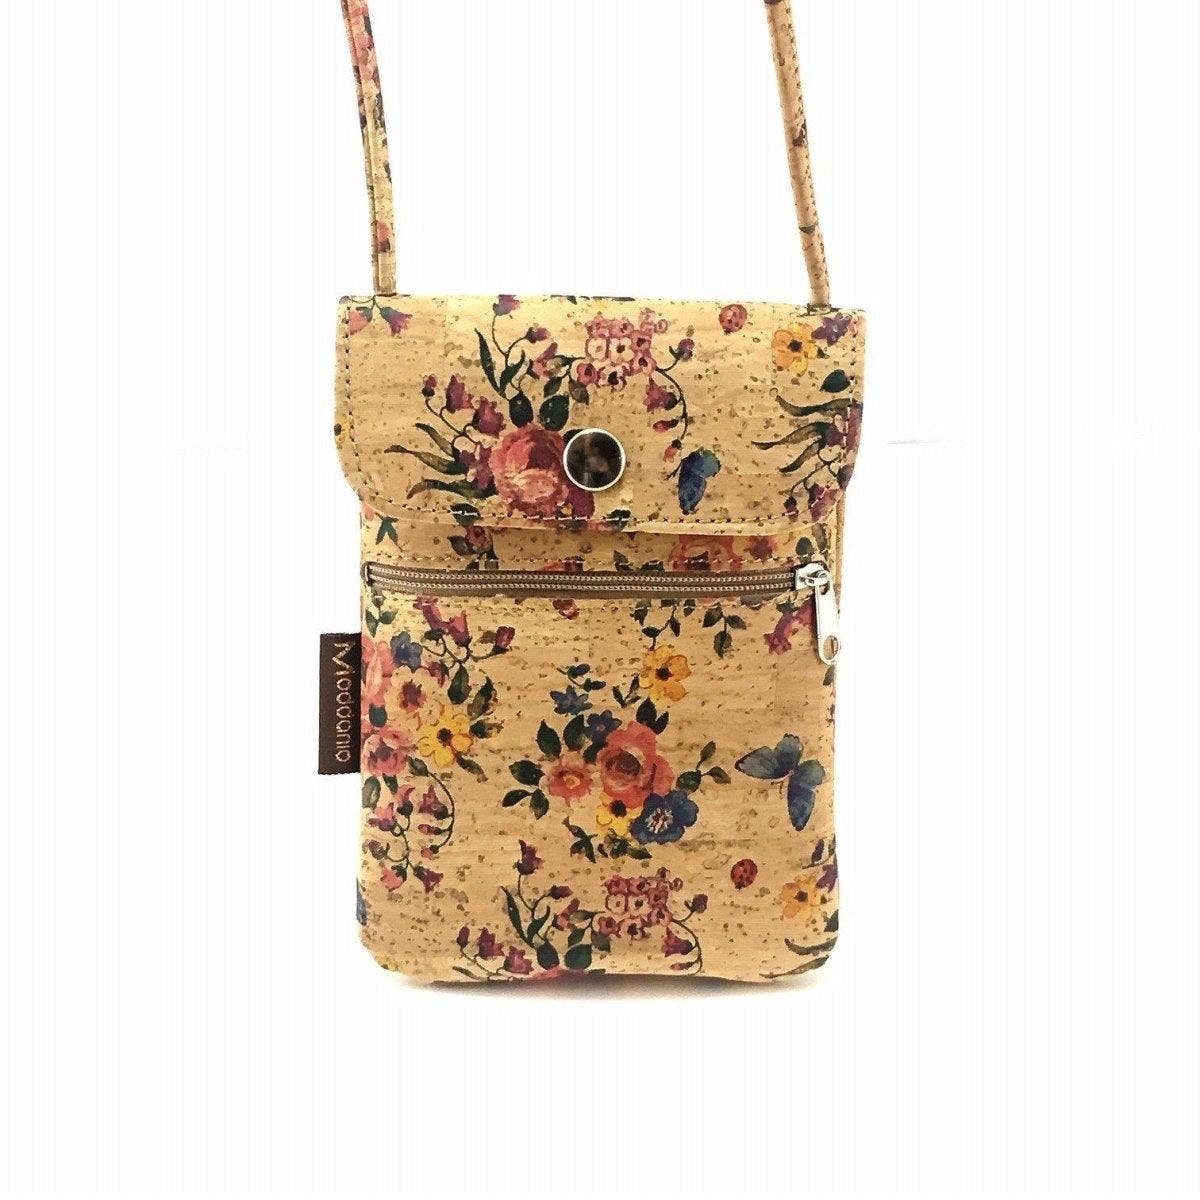 Cork Phone Bag and Phone Pouch in Rose Floral